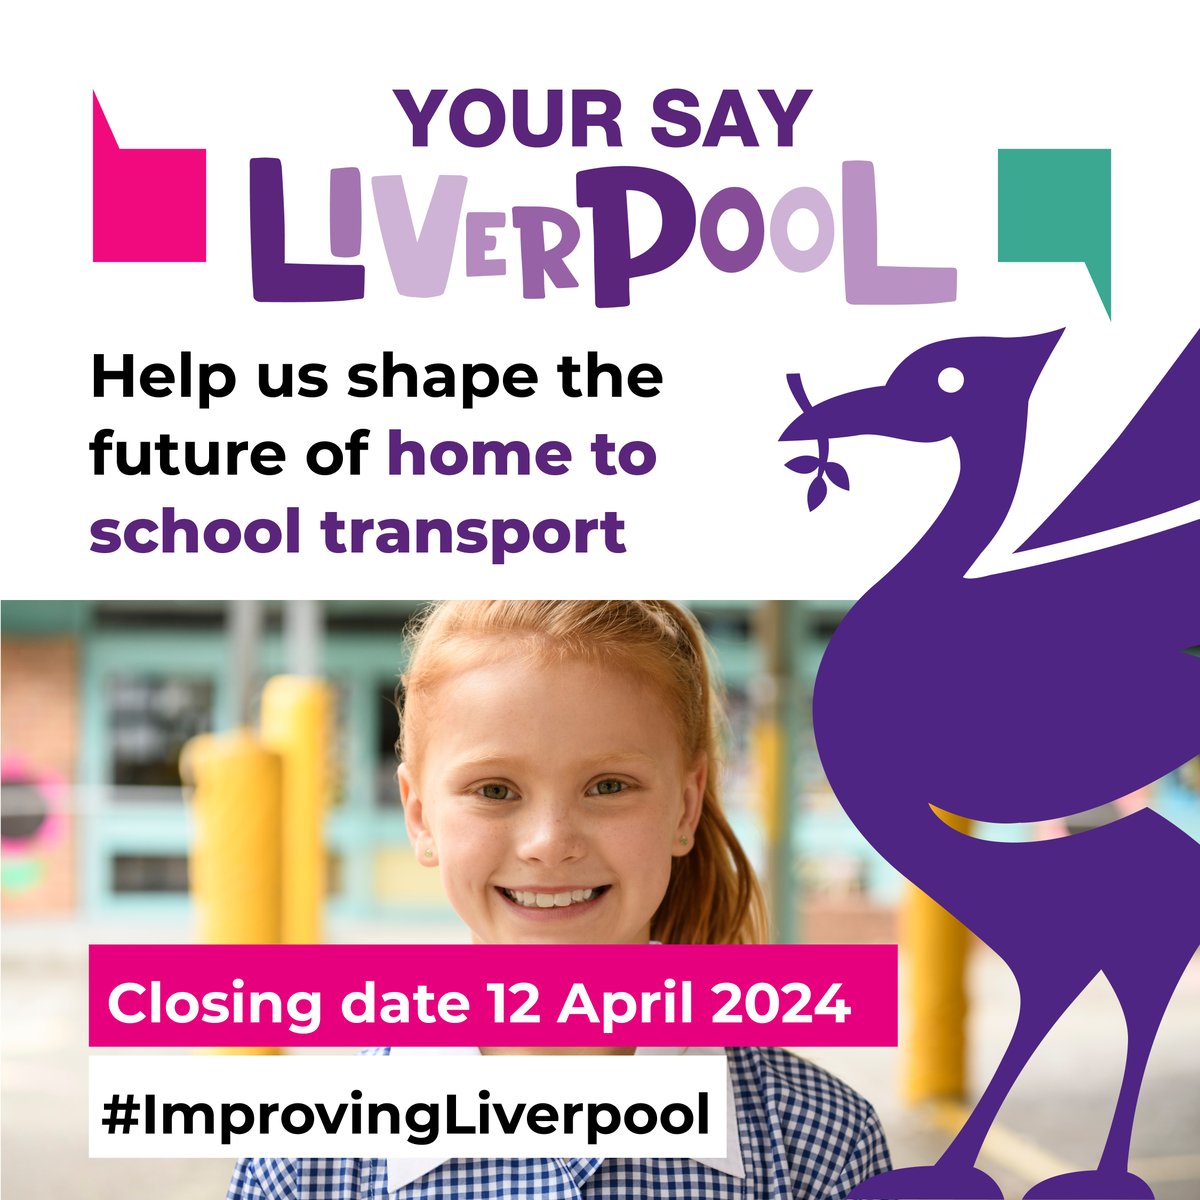 #CONSULTATION | Have your say on a review of Home to School Transport. Click the link for more info. liverpool.gov.uk/council/consul…